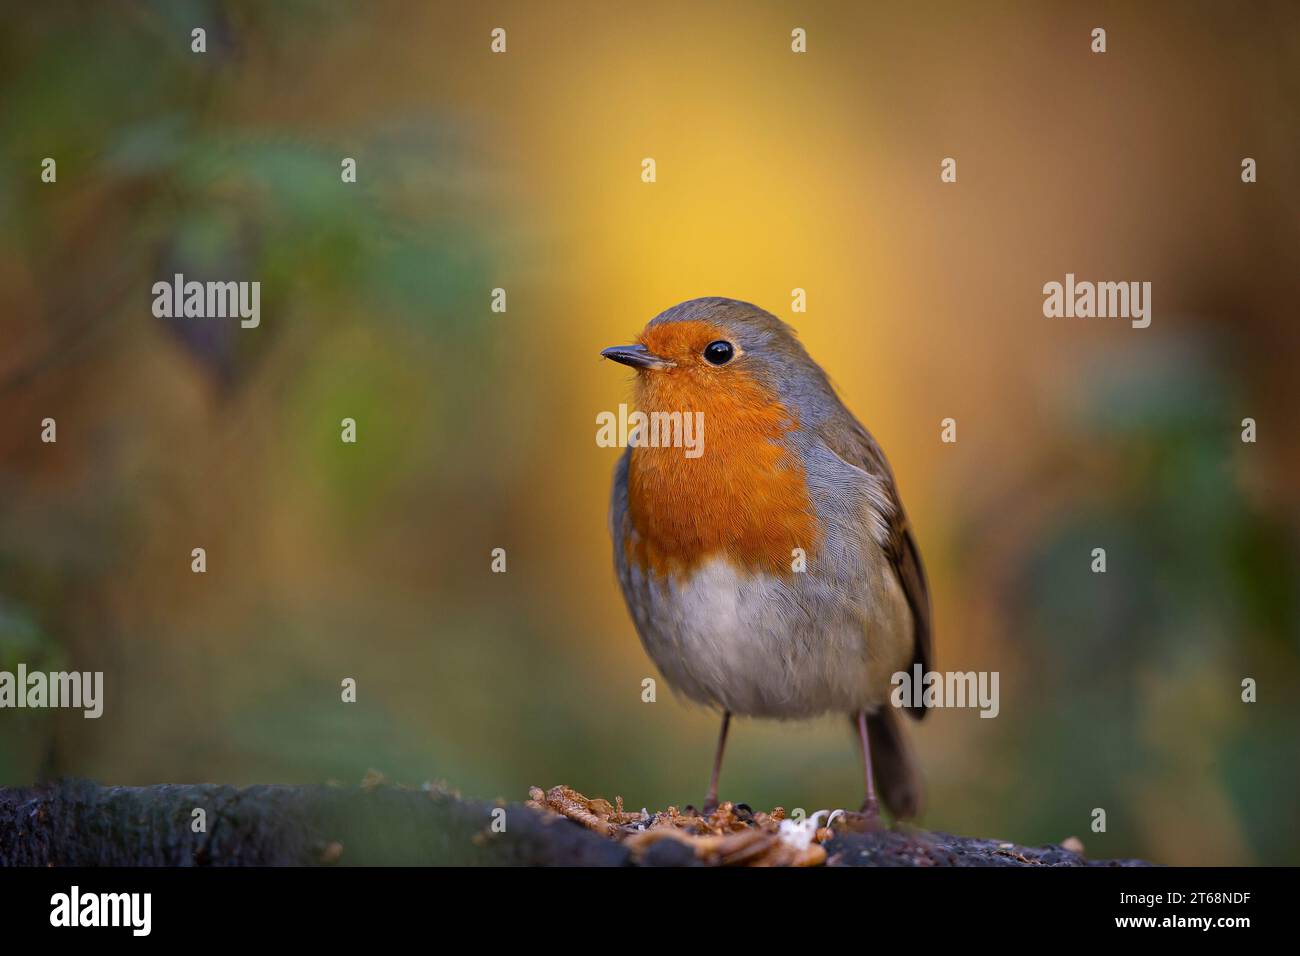 Kidderminster, UK. 9th November, 2023. UK weather: the local wildlife enjoys a moment of glorious sunshine today, quite a contrast to the past wet, gloomy week. A lone robin bird poses for a second in the sunshine before foraging for its autumn morning snack. Credit: Lee Hudson/Alamy Live News Stock Photo